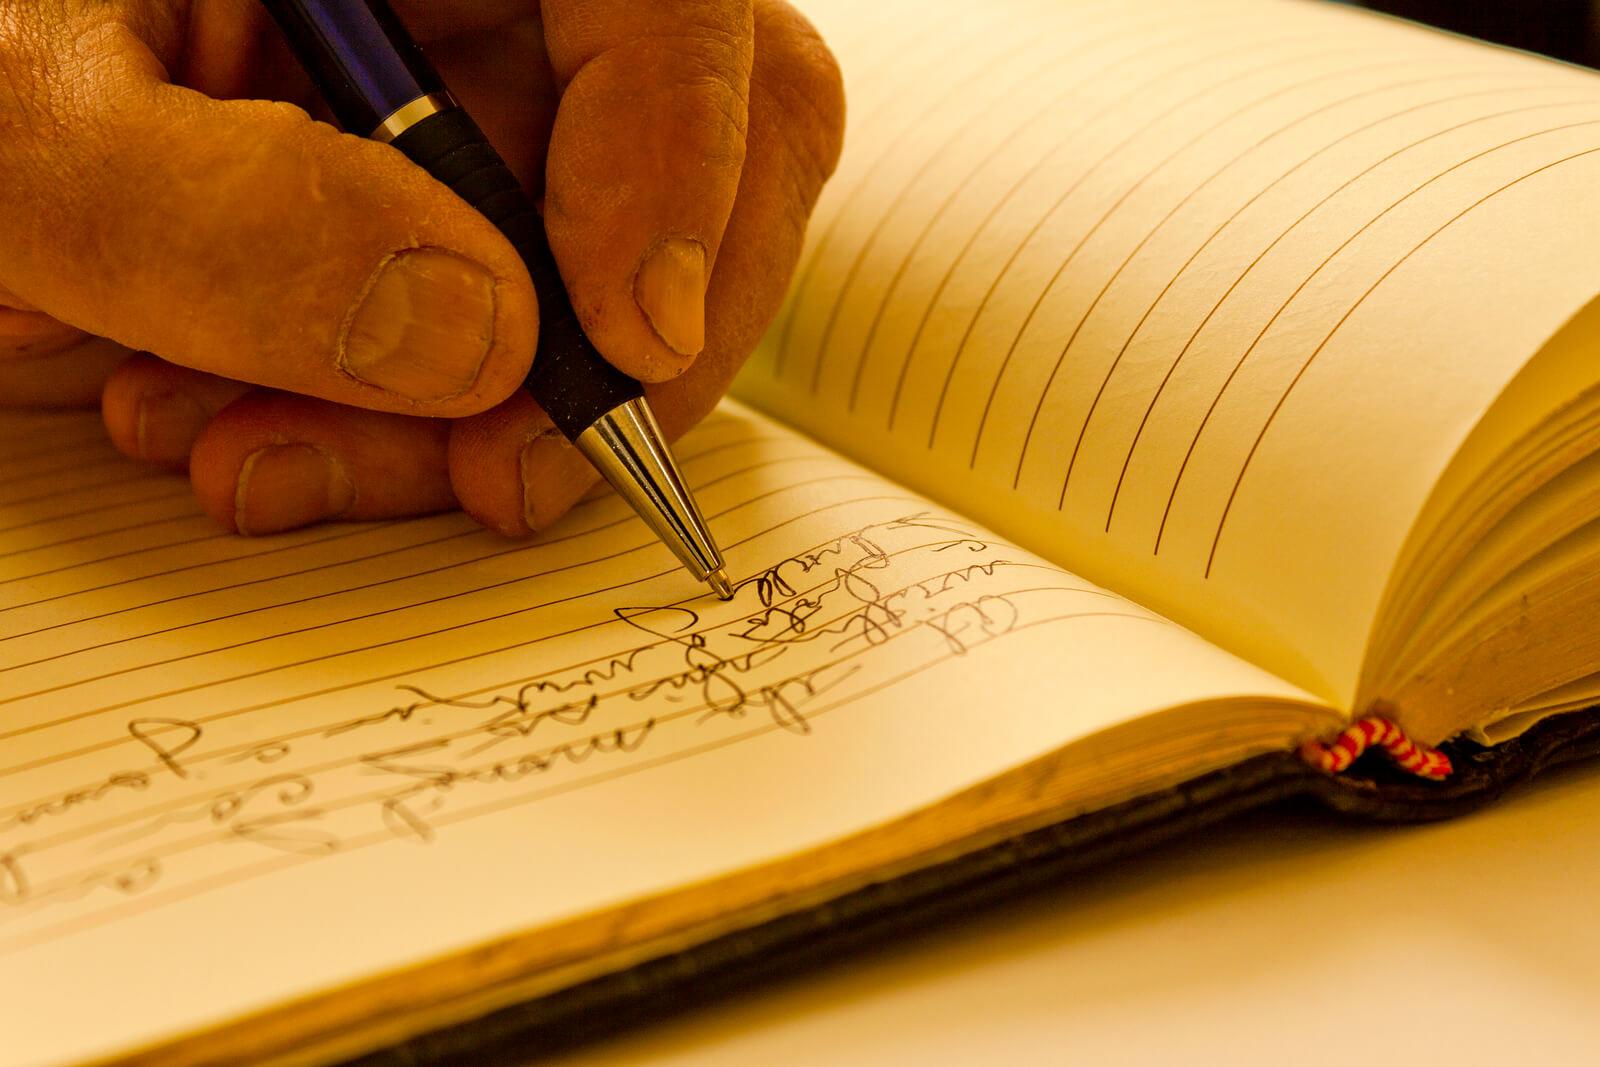 Man writing in a journal.